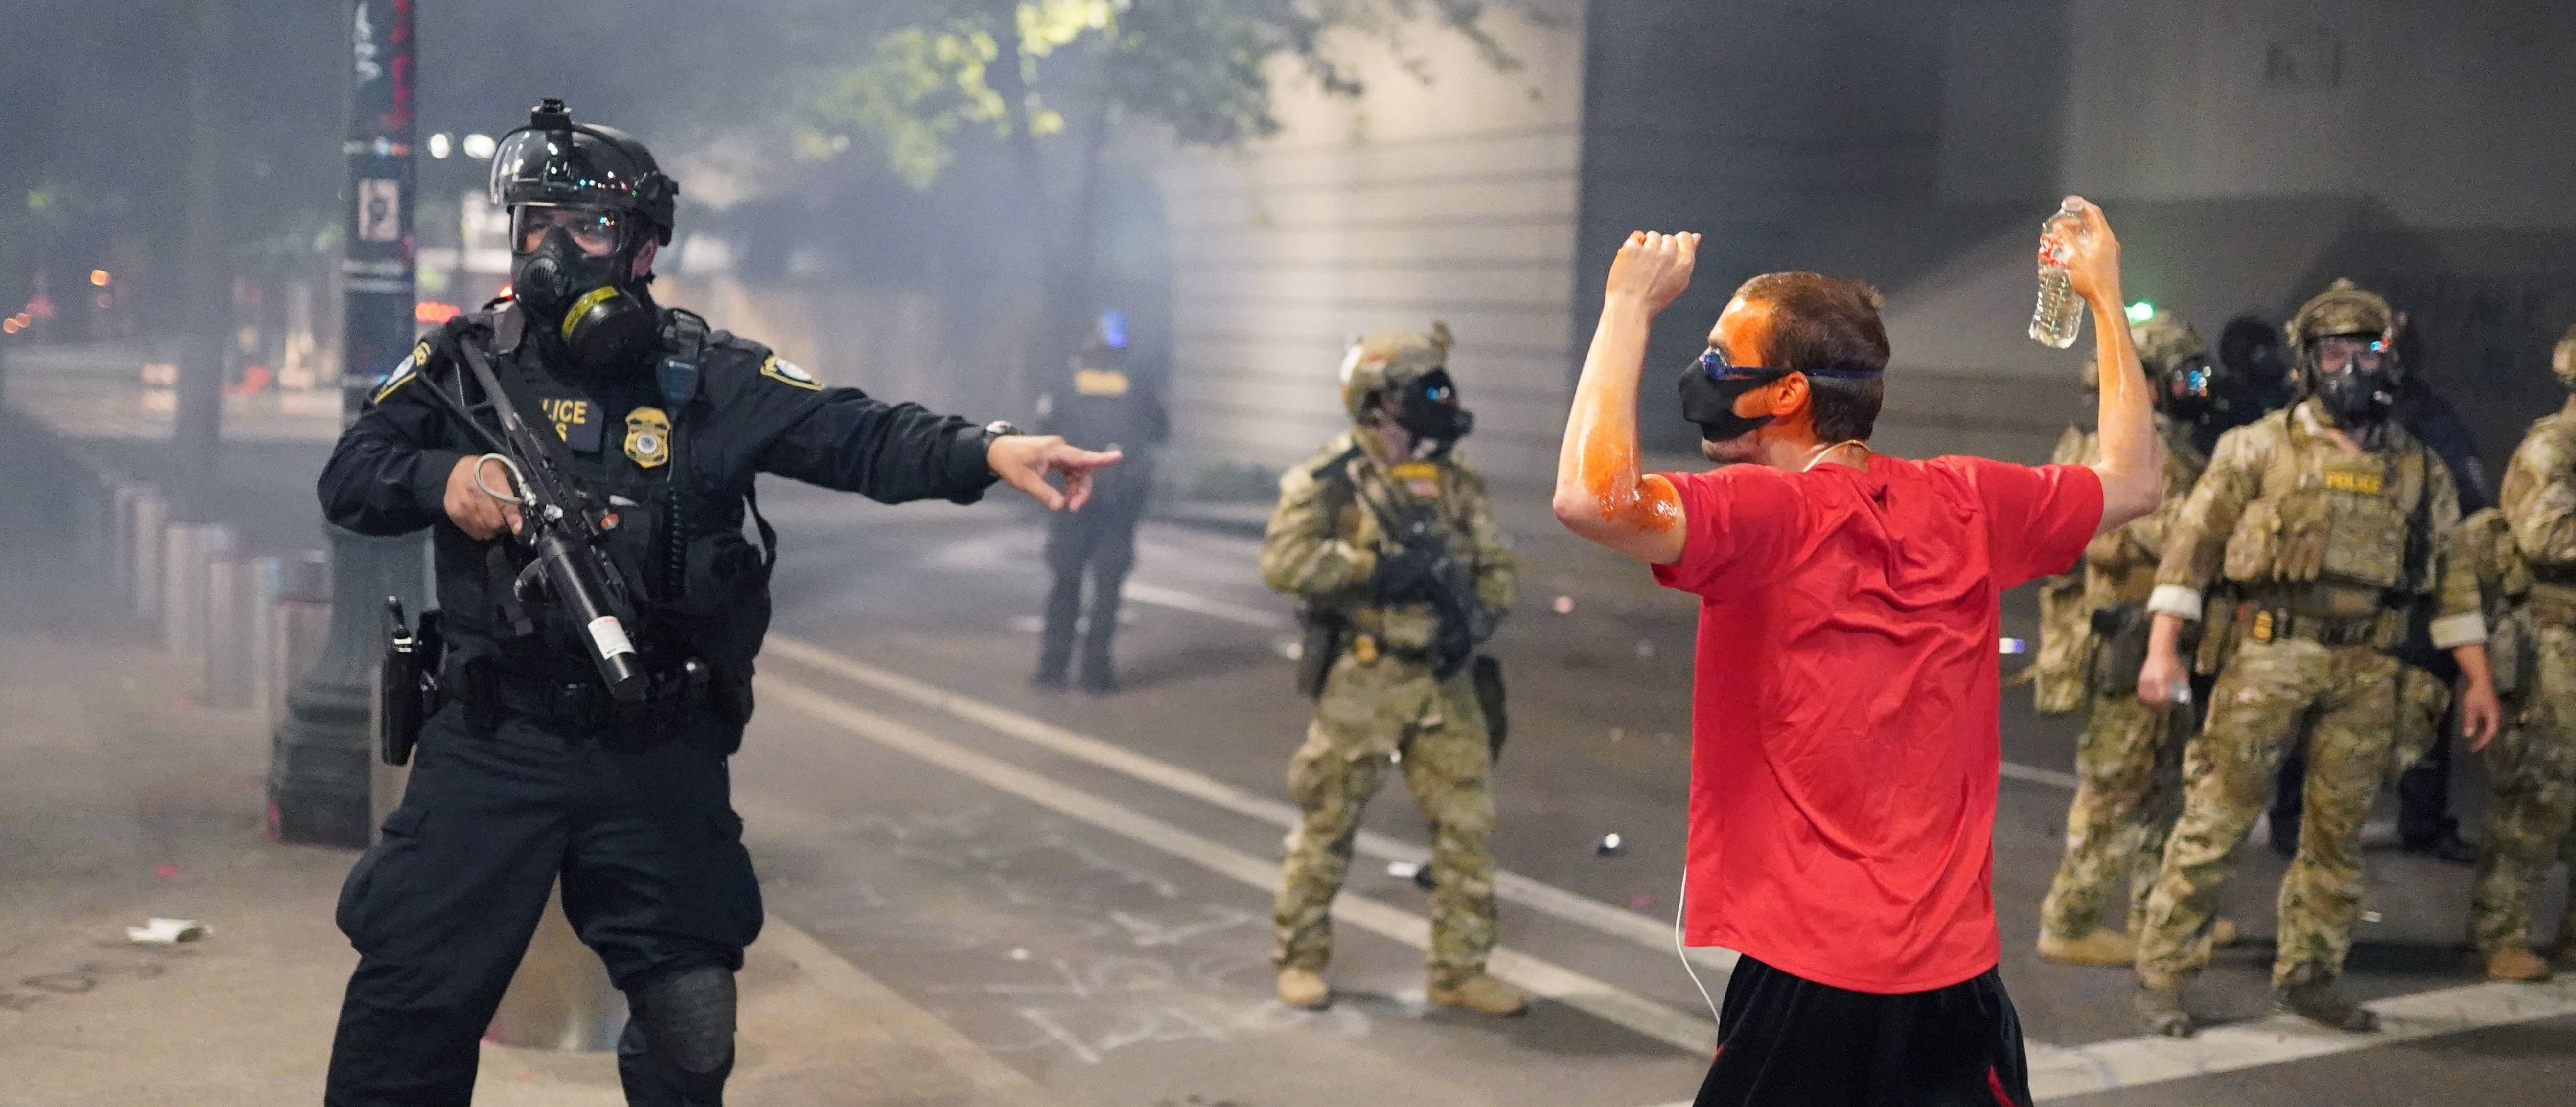 A federal officer tells fellow officers to arrest a protester in front of the Mark O. Hatfield U.S. Courthouse on July 21, 2020 in Portland, Oregon. State and city elected officials have called for the federal officers to leave Portland as clashes between protesters and federal police continue to escalate. (Photo by Nathan Howard/Getty Images)